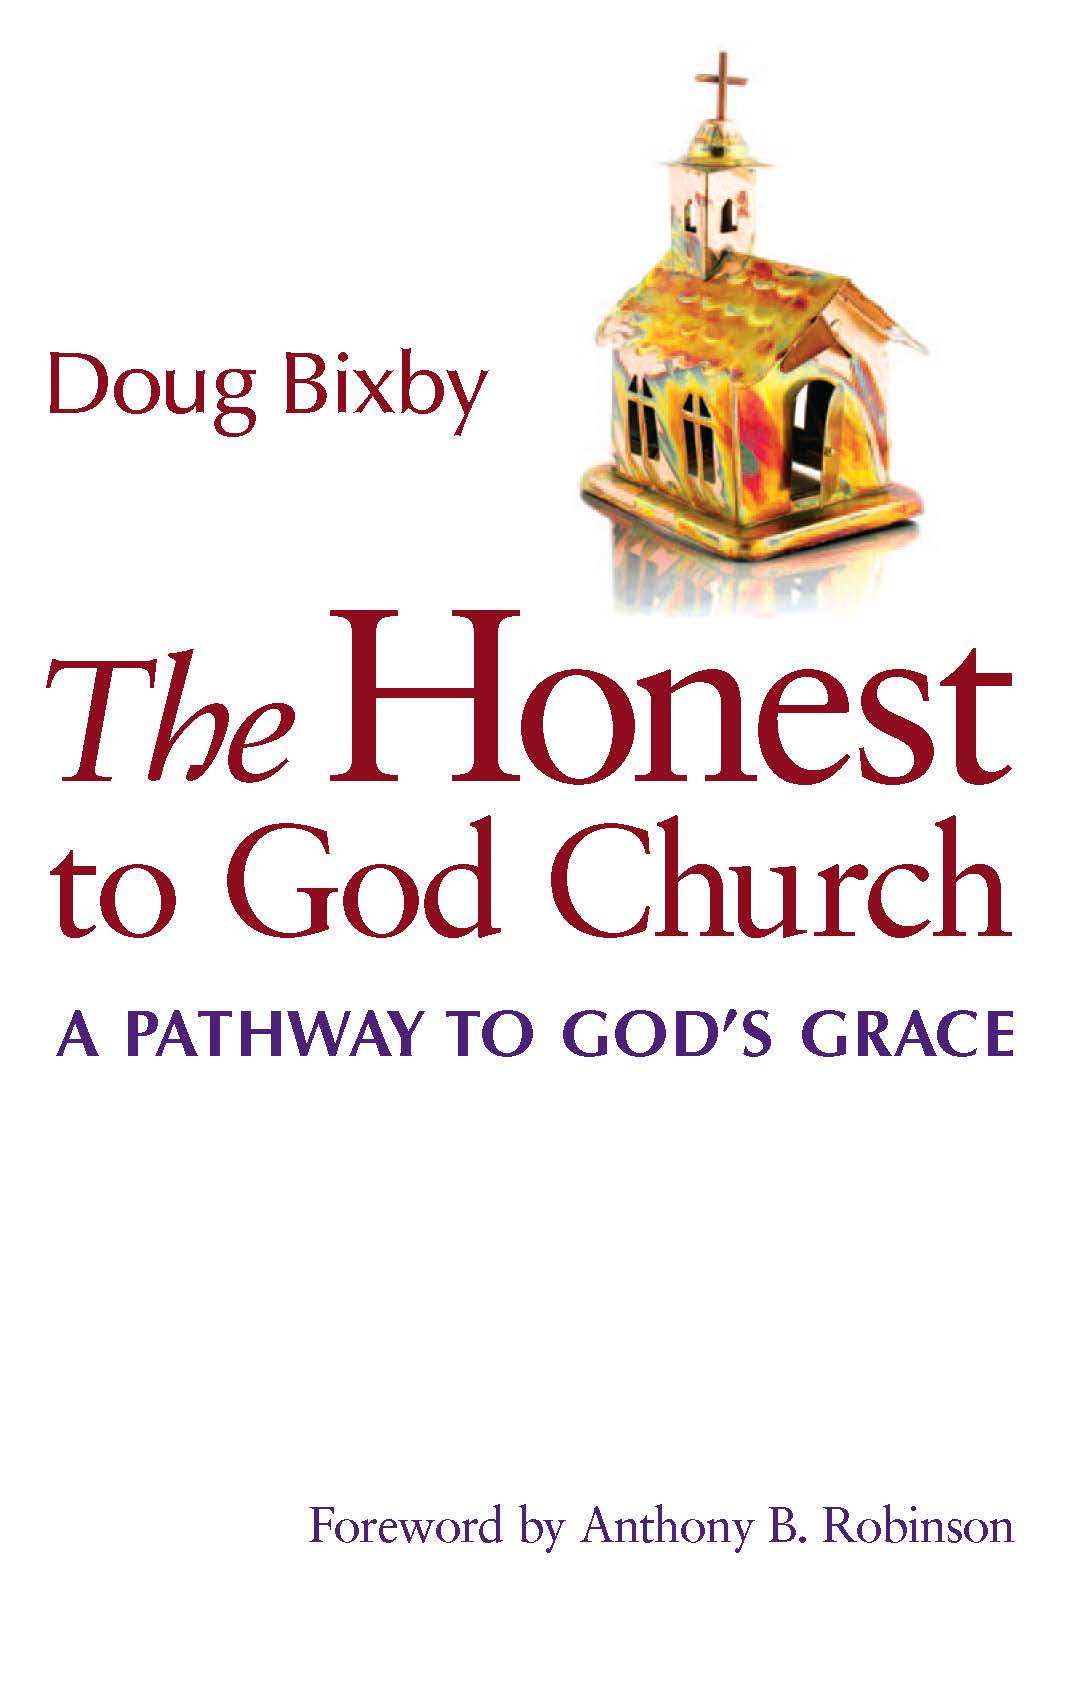 The Honest to God Church: A Pathway to God's Grace